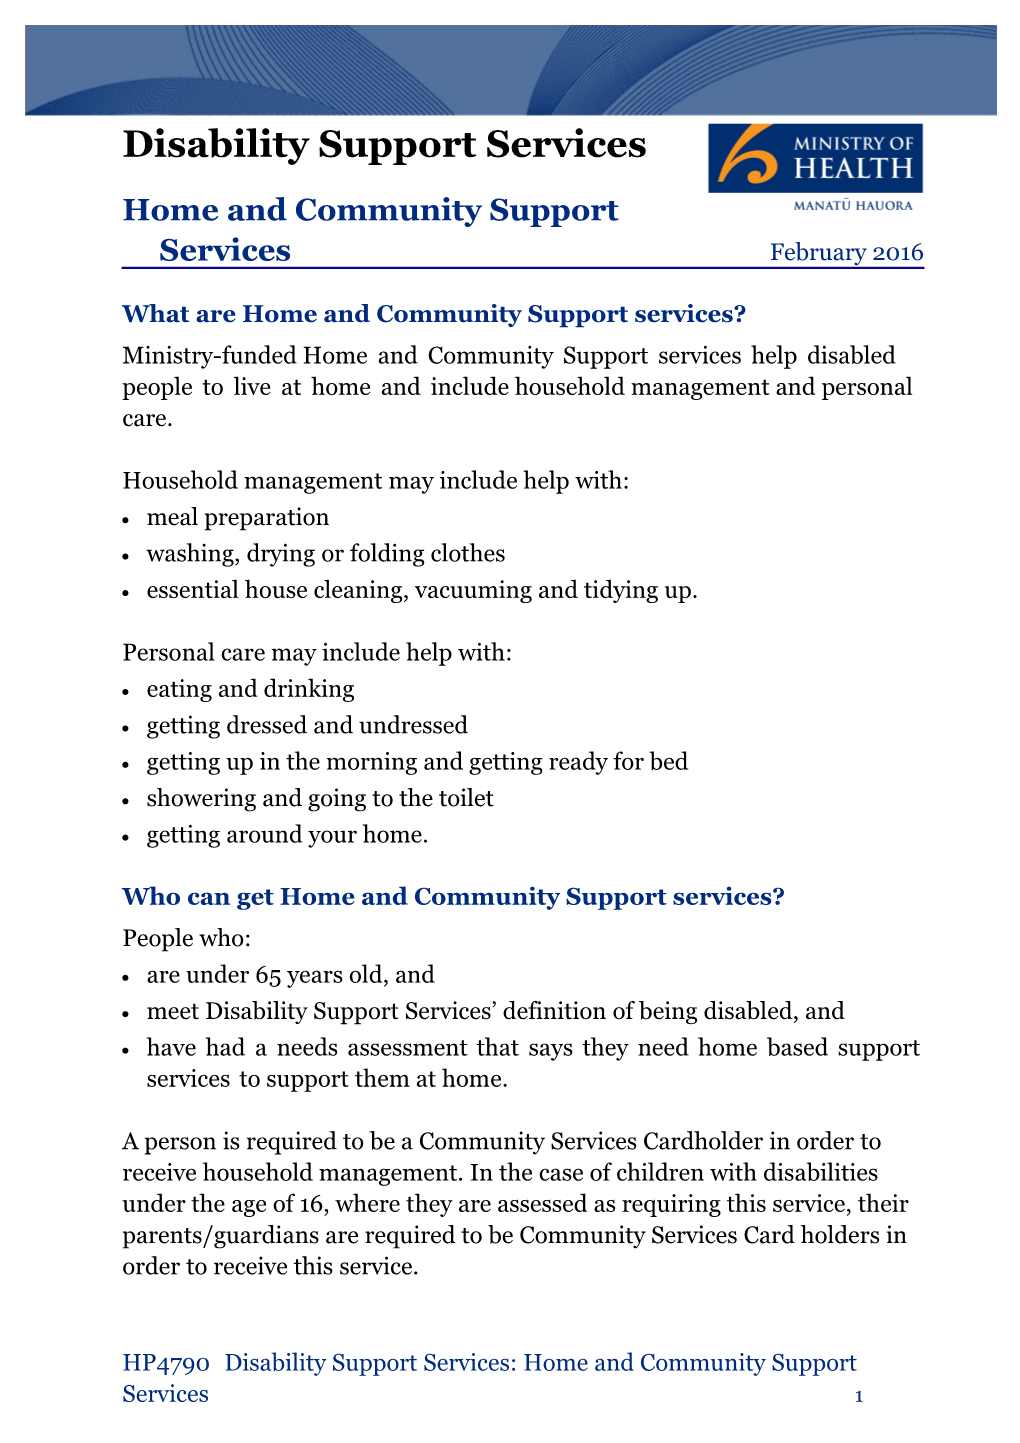 Home and Community Support Services